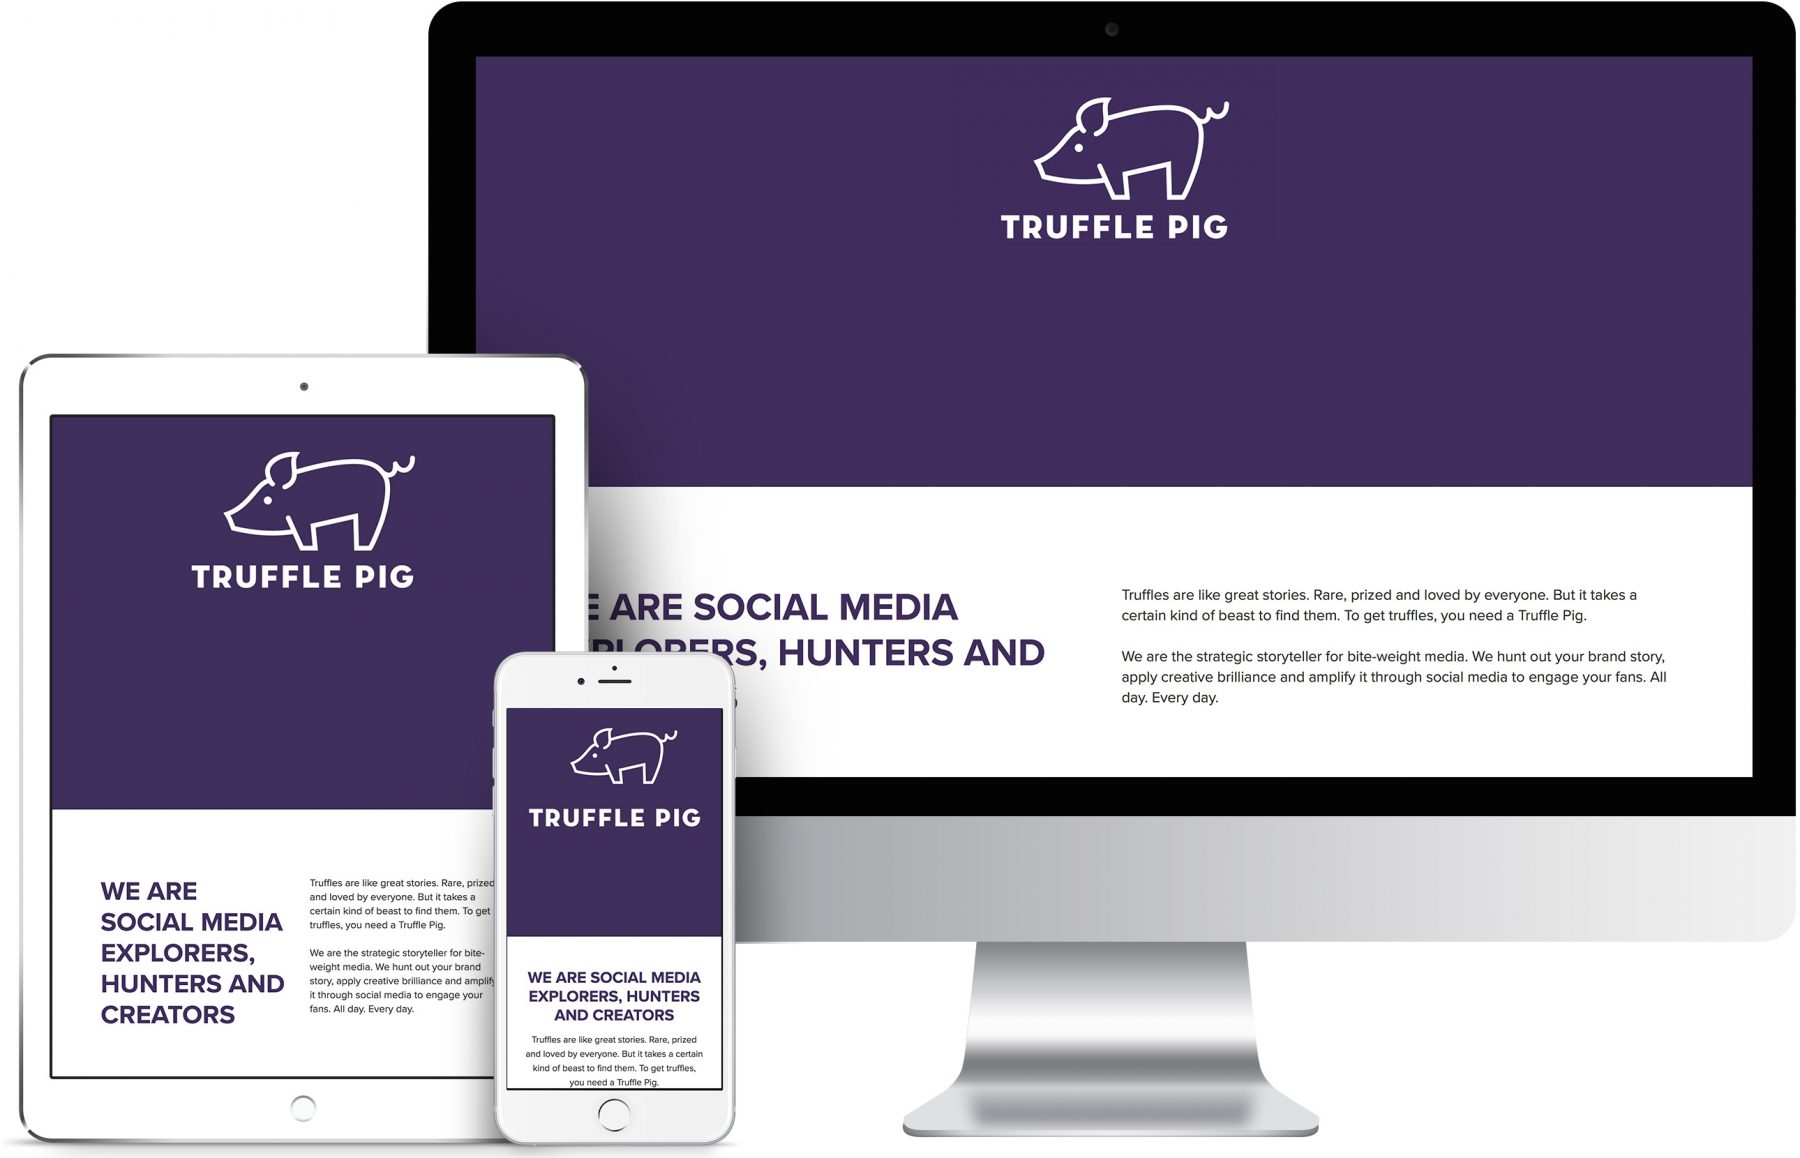 Truffle Pig Project Images